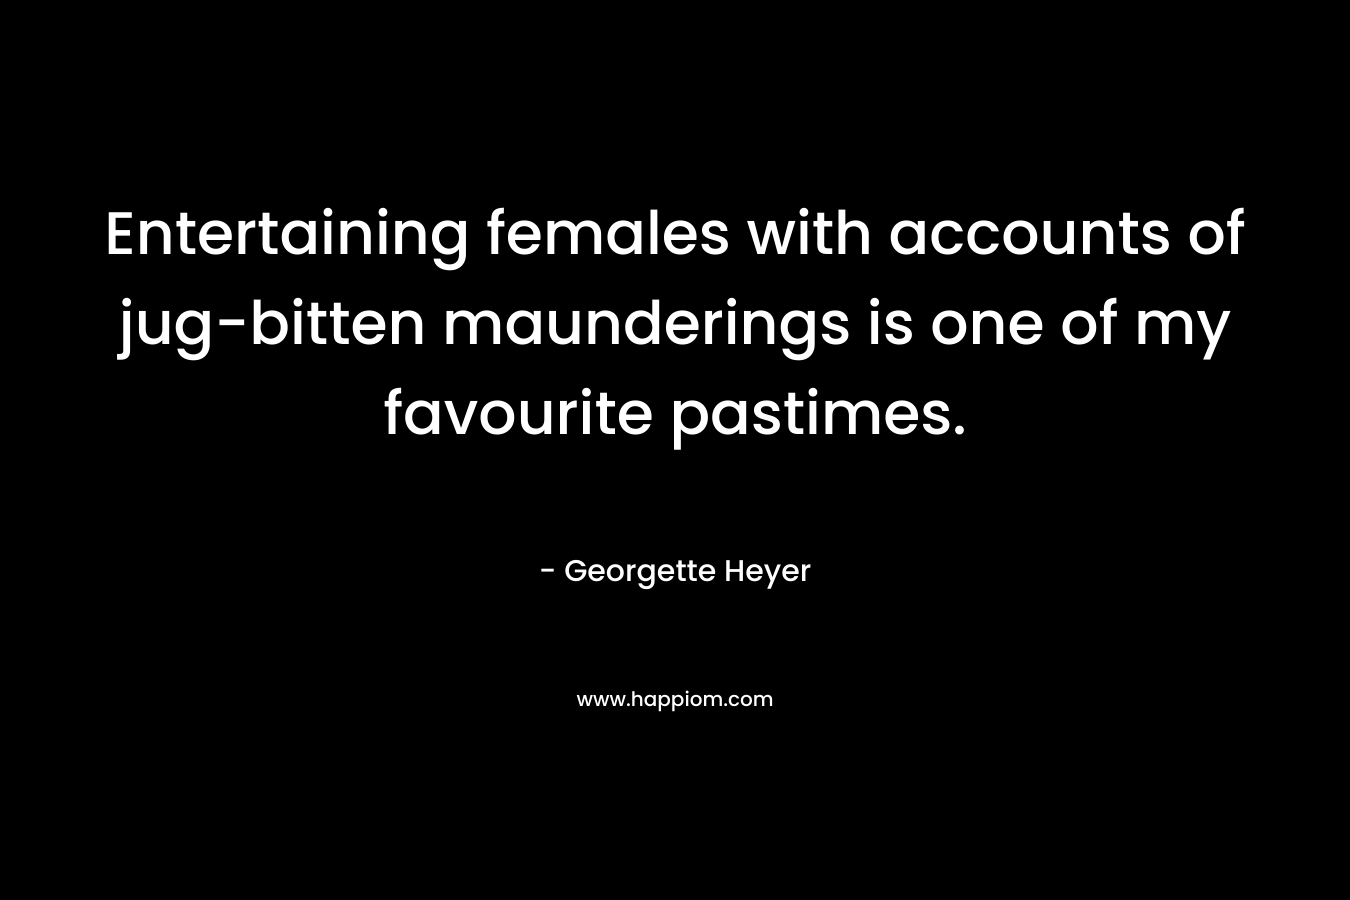 Entertaining females with accounts of jug-bitten maunderings is one of my favourite pastimes. – Georgette Heyer